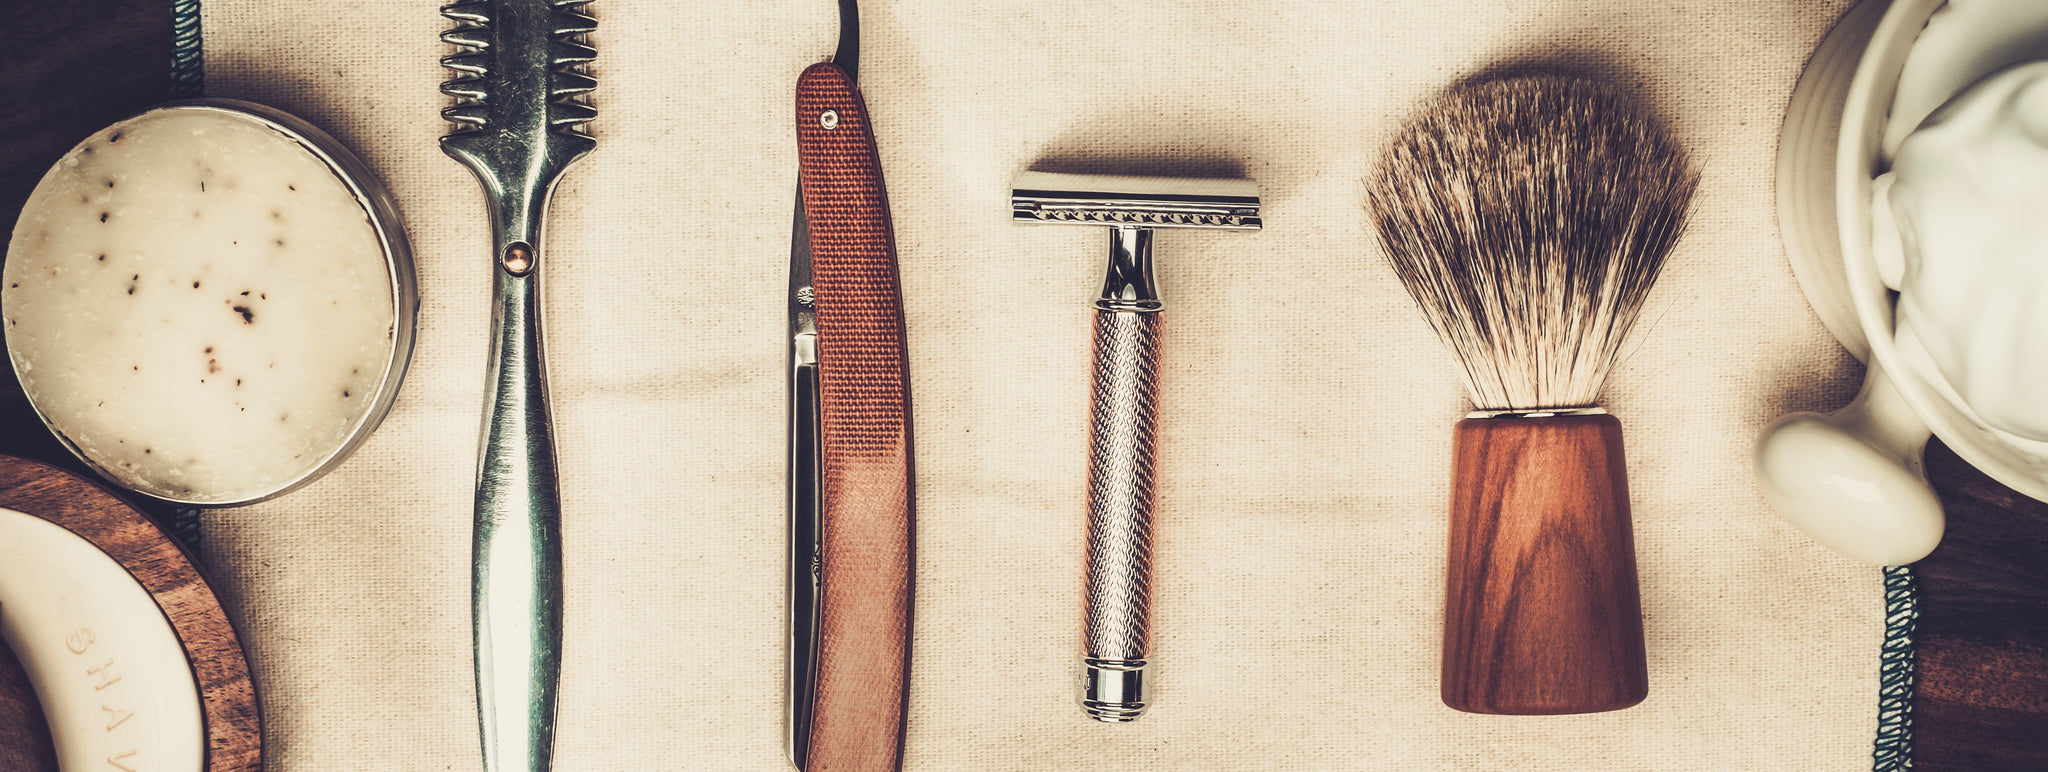 Tips and Advice for First Time Straight Razor Shaving by Vintage Grooming Company. Beard, Mustache, Hair care made in Colorado, USA by Veteran Owned business 